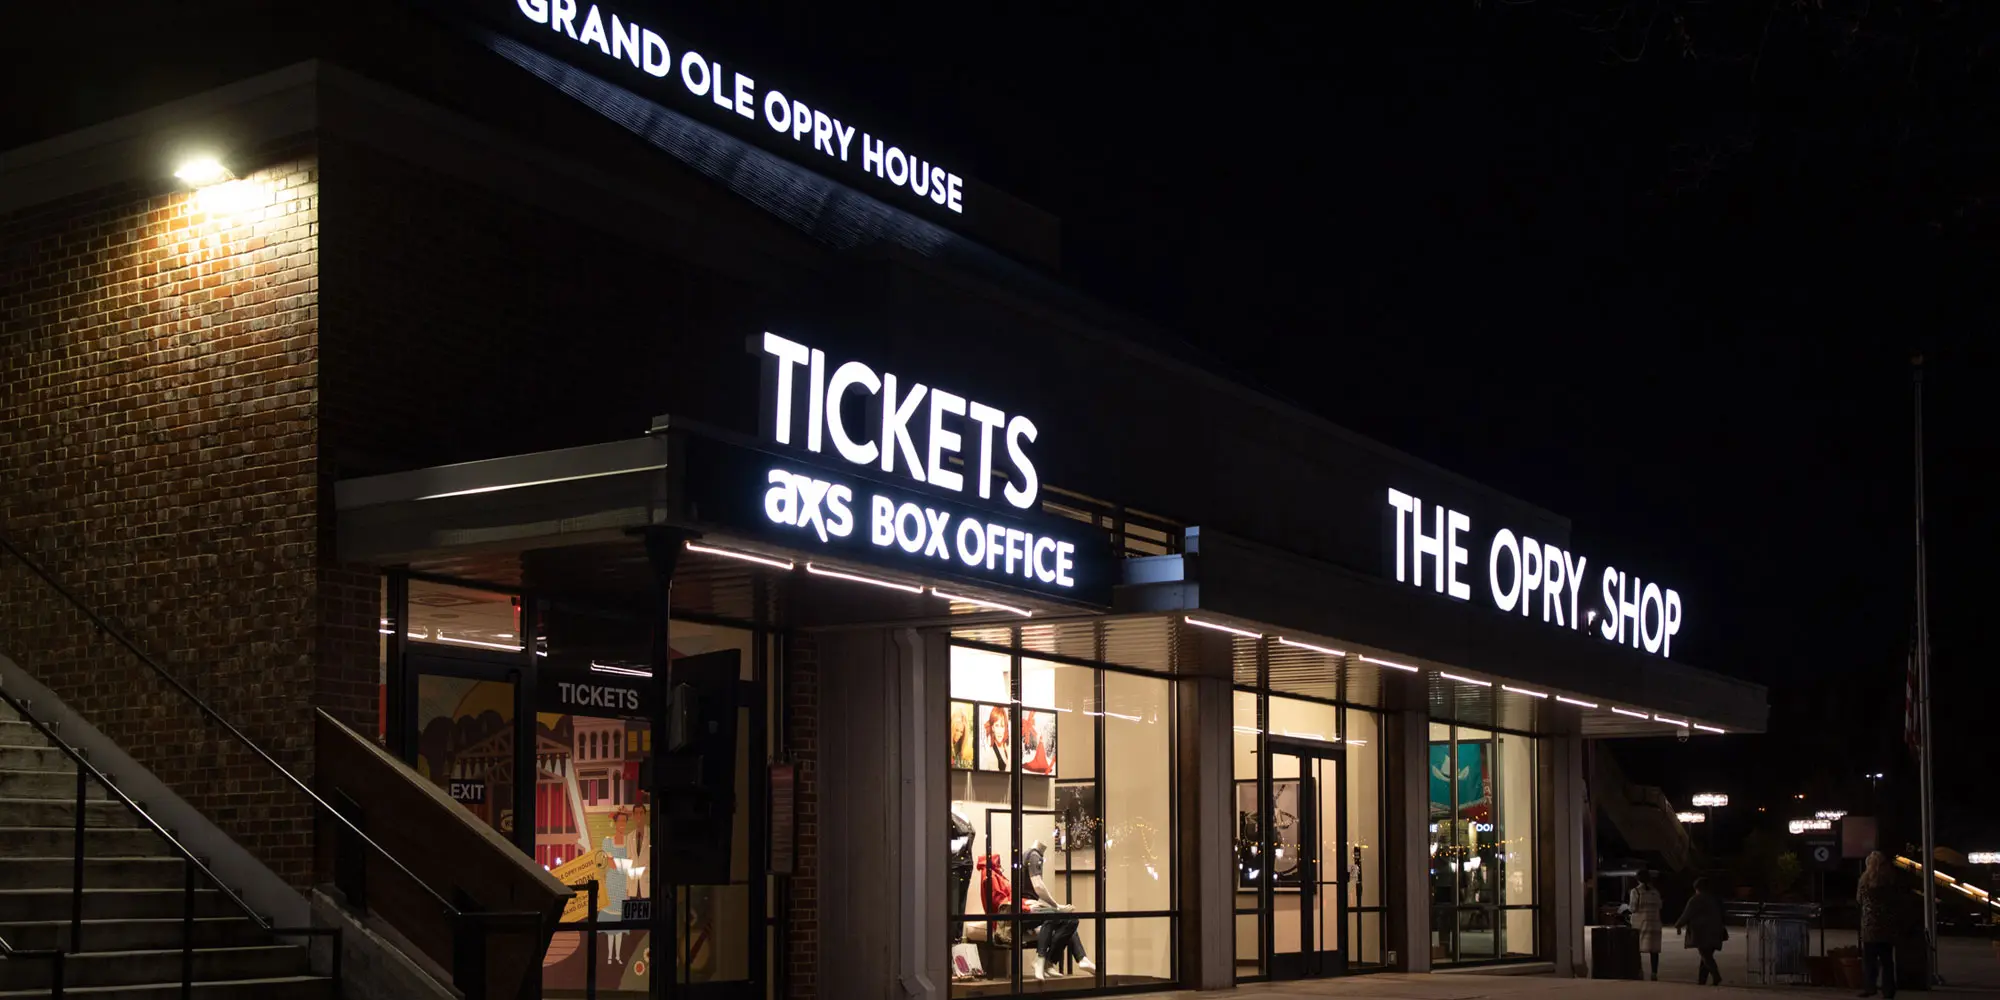 Night time photo of the AXS Box Office at the Grand Ole Opry House